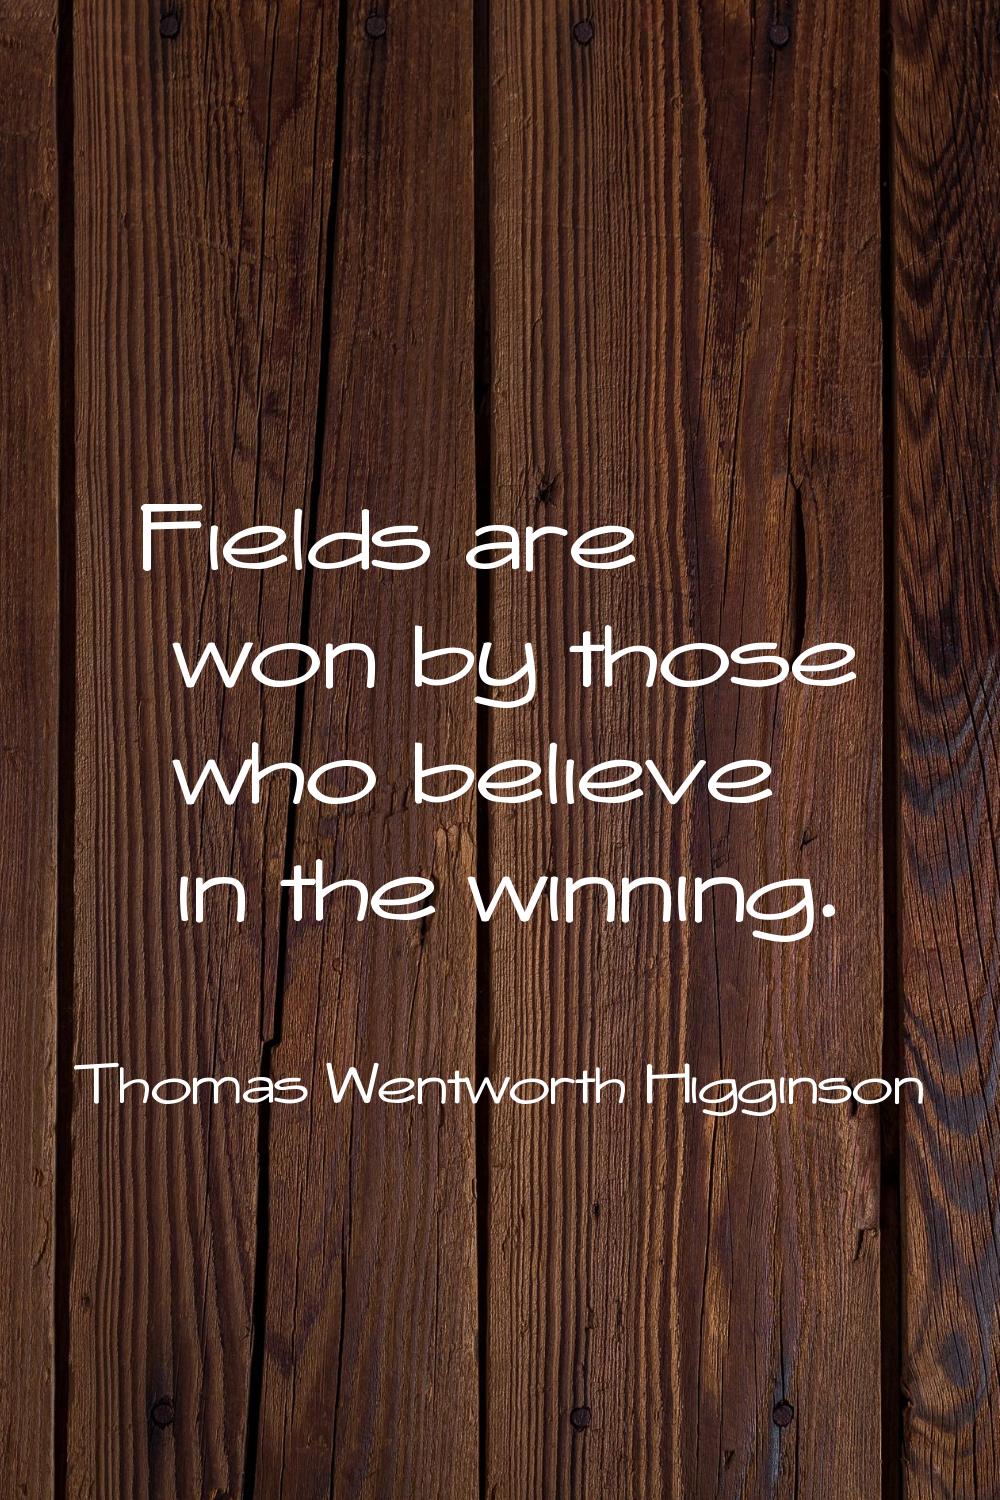 Fields are won by those who believe in the winning.